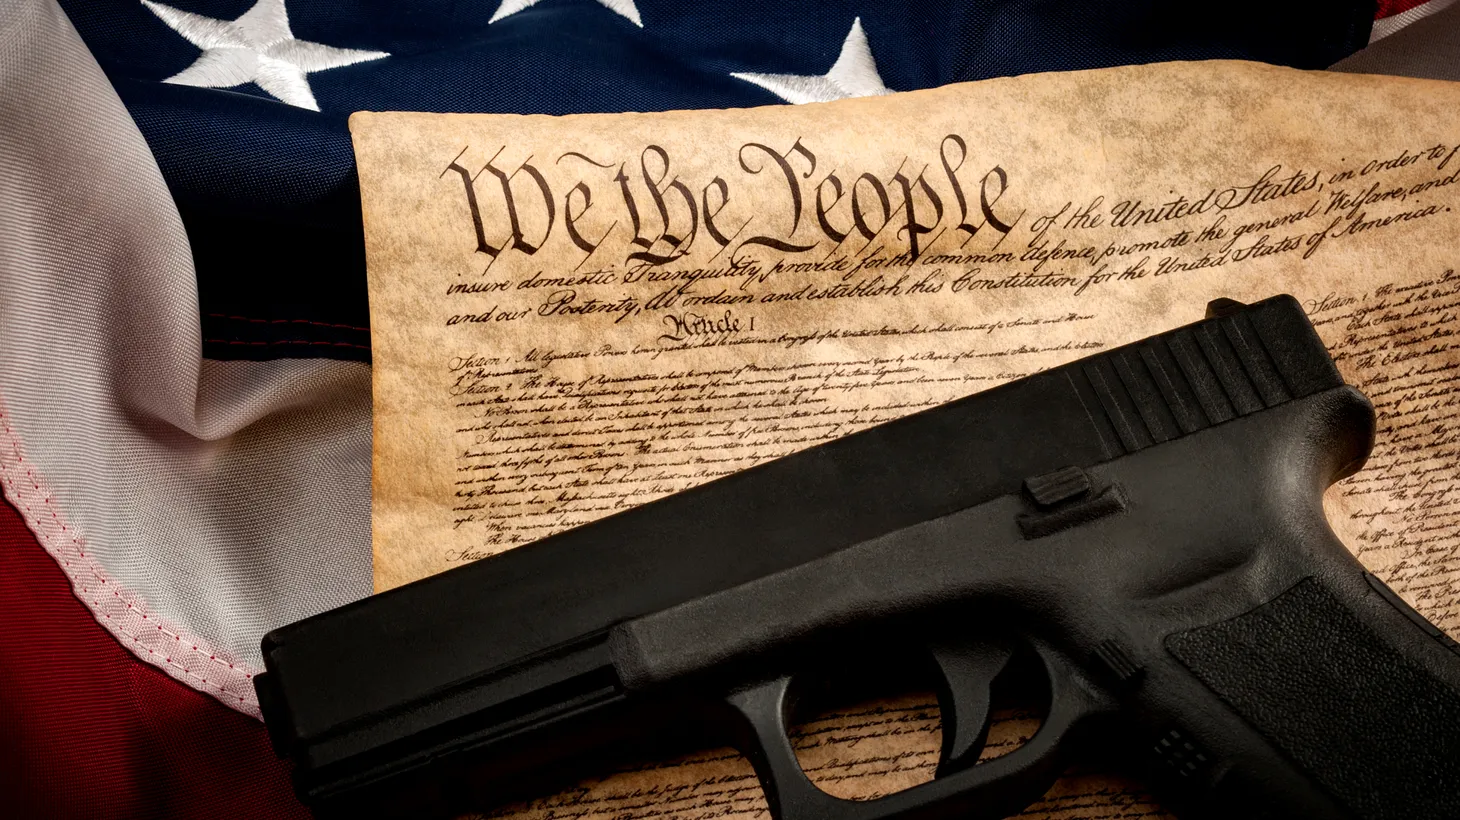 “The next big legal question facing the [U.S.] Supreme Court with respect to the Second Amendment isn’t whether any restrictions are permissible, but which ones are,” says Loyola Law School professor Jessica Levinson.